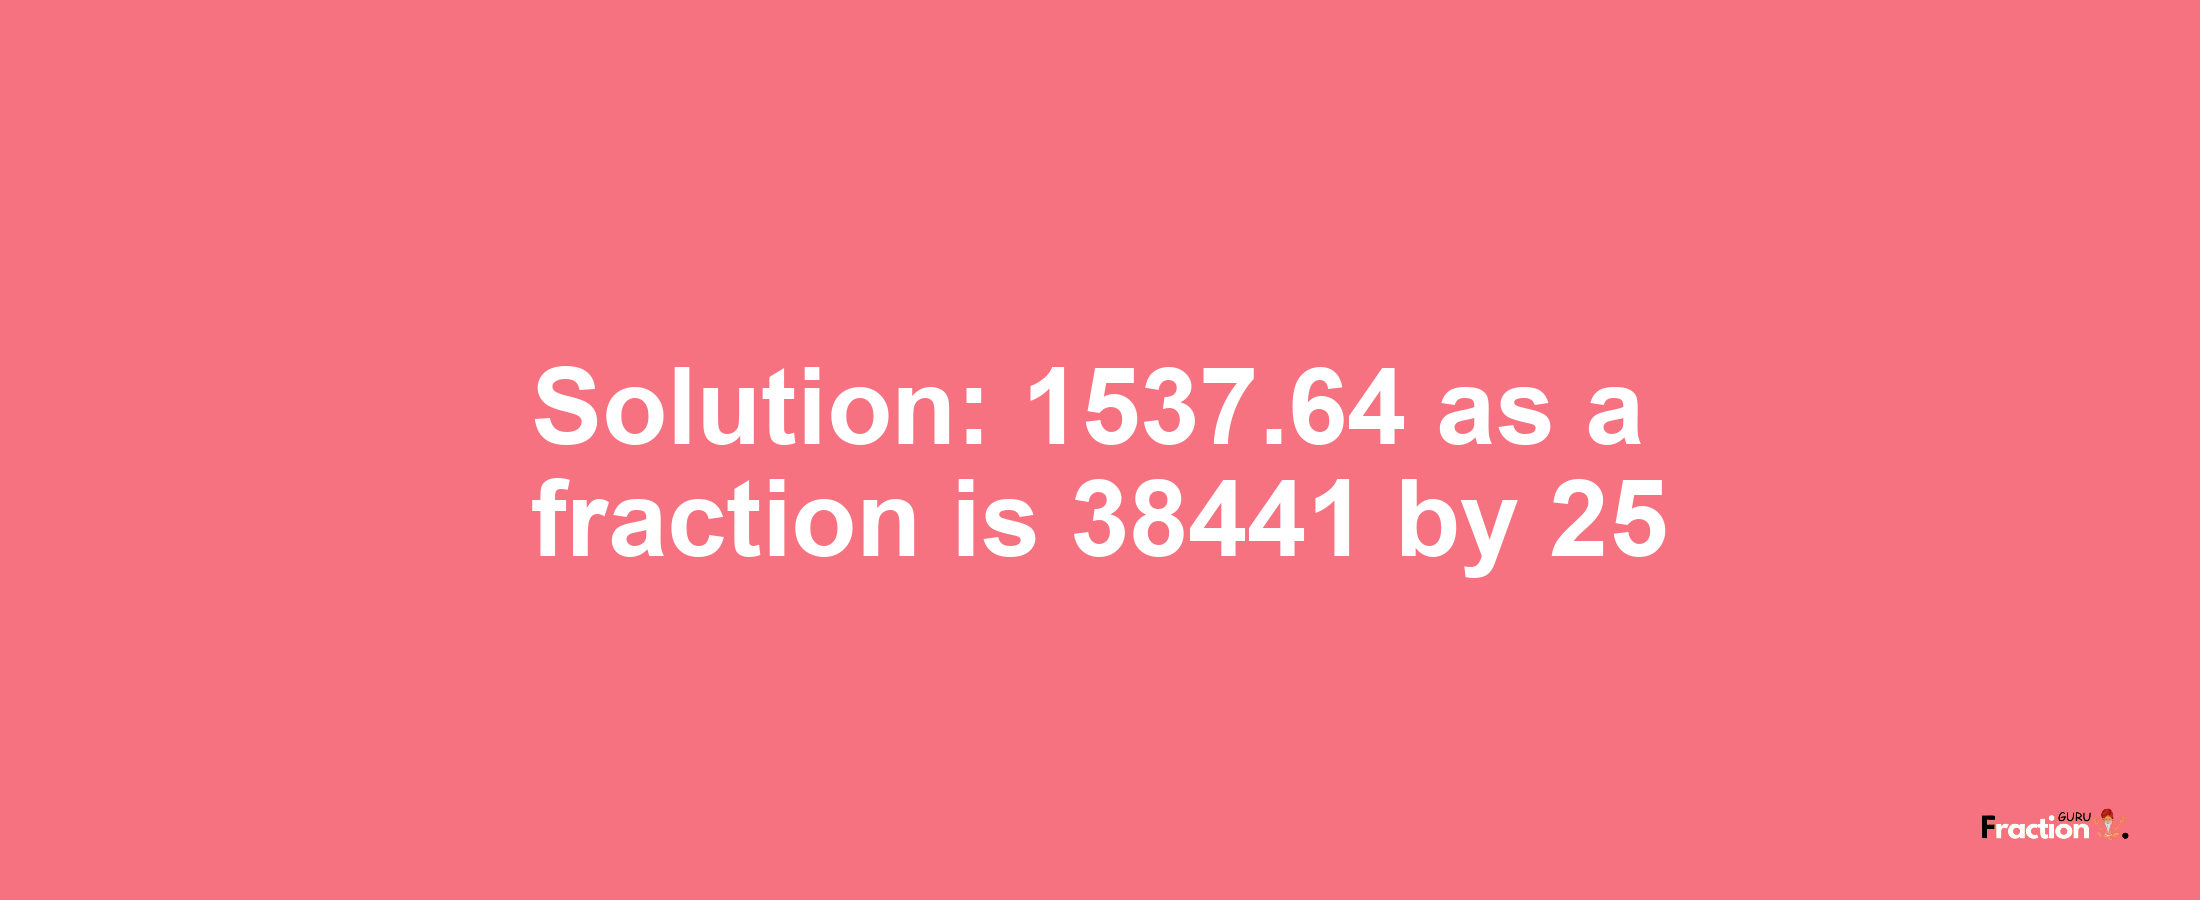 Solution:1537.64 as a fraction is 38441/25